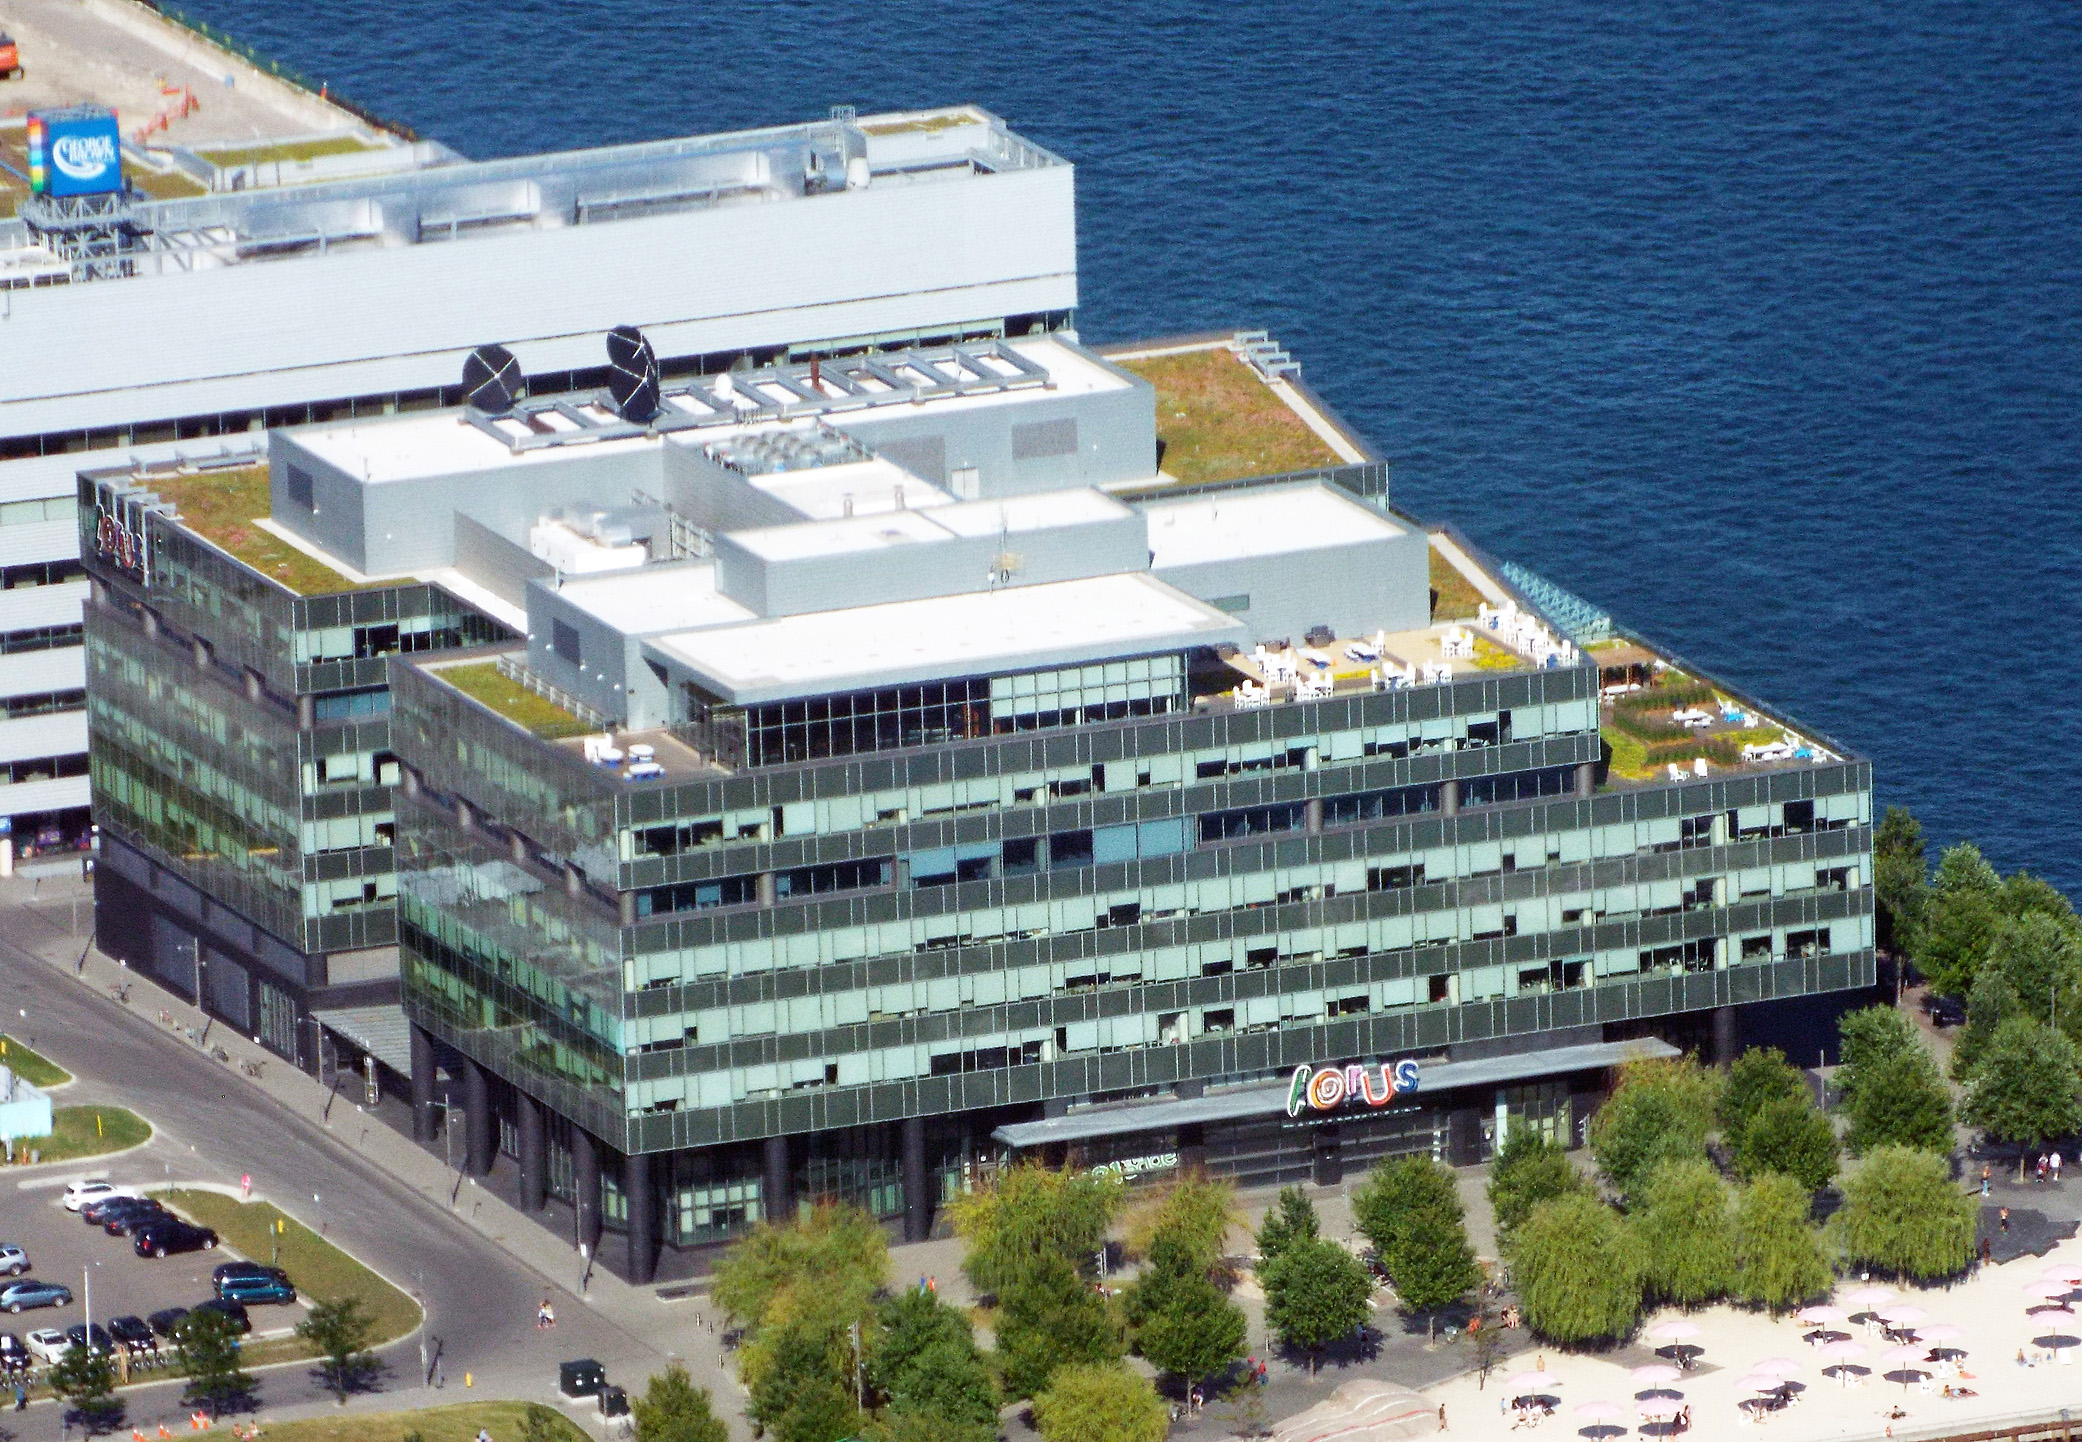 Corus's headquarters, [[Corus Quay]] in Toronto, as seen from the [[CN Tower]]